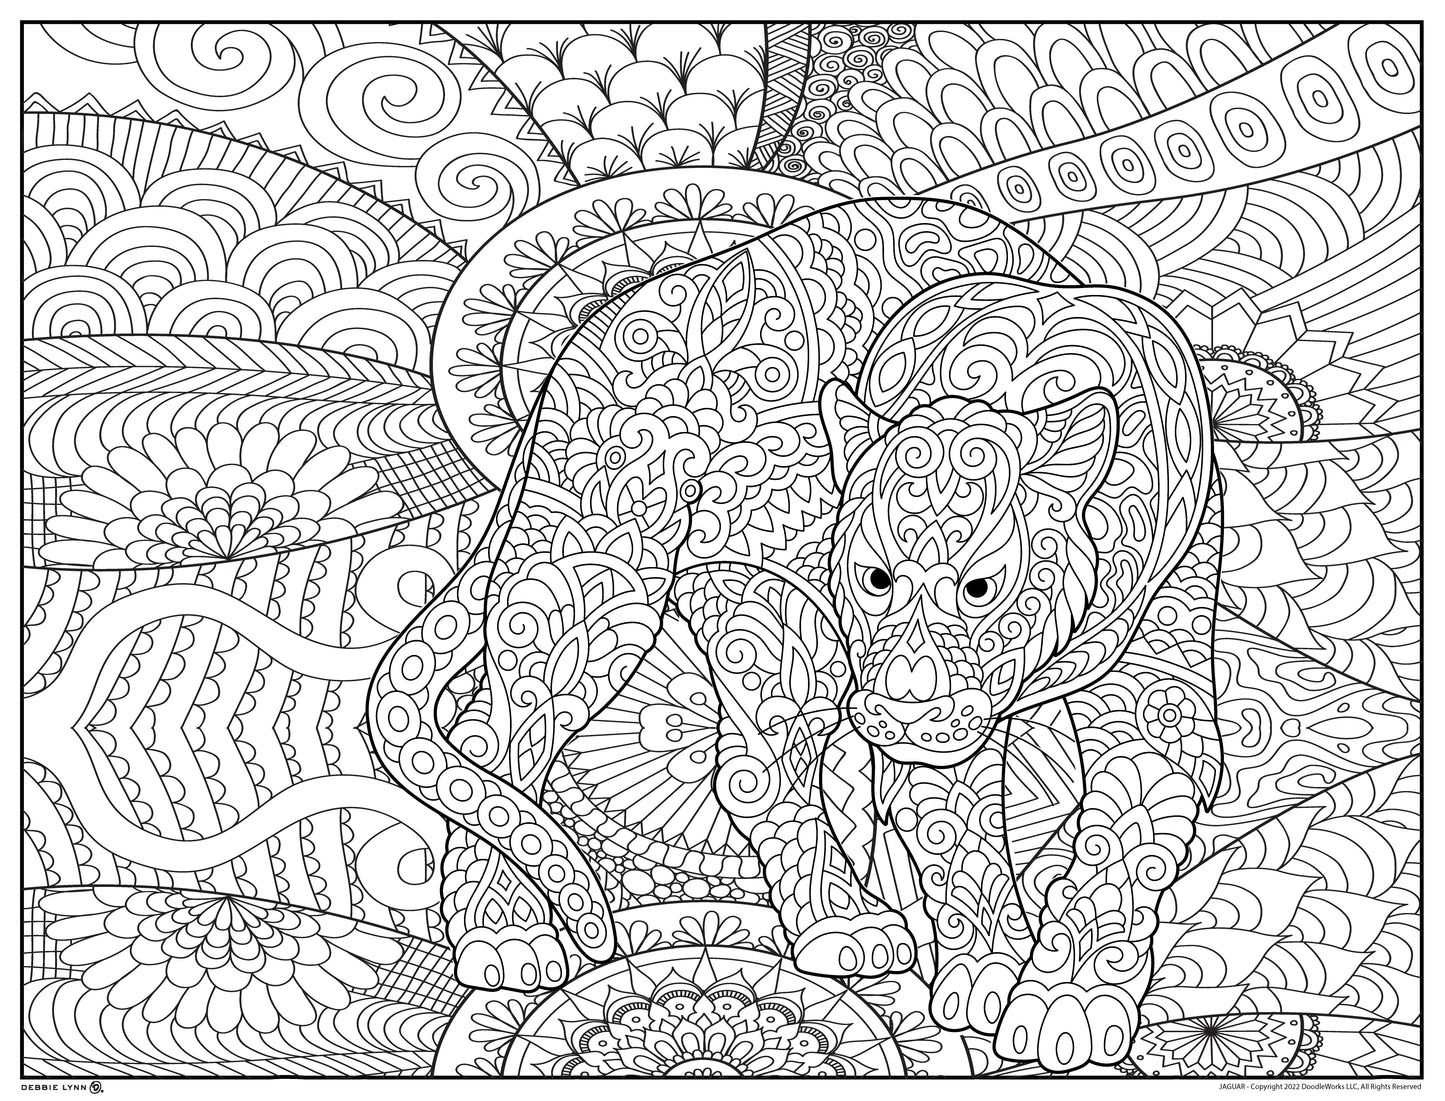 Jaguar Personalized Giant Coloring Poster 46"x60"